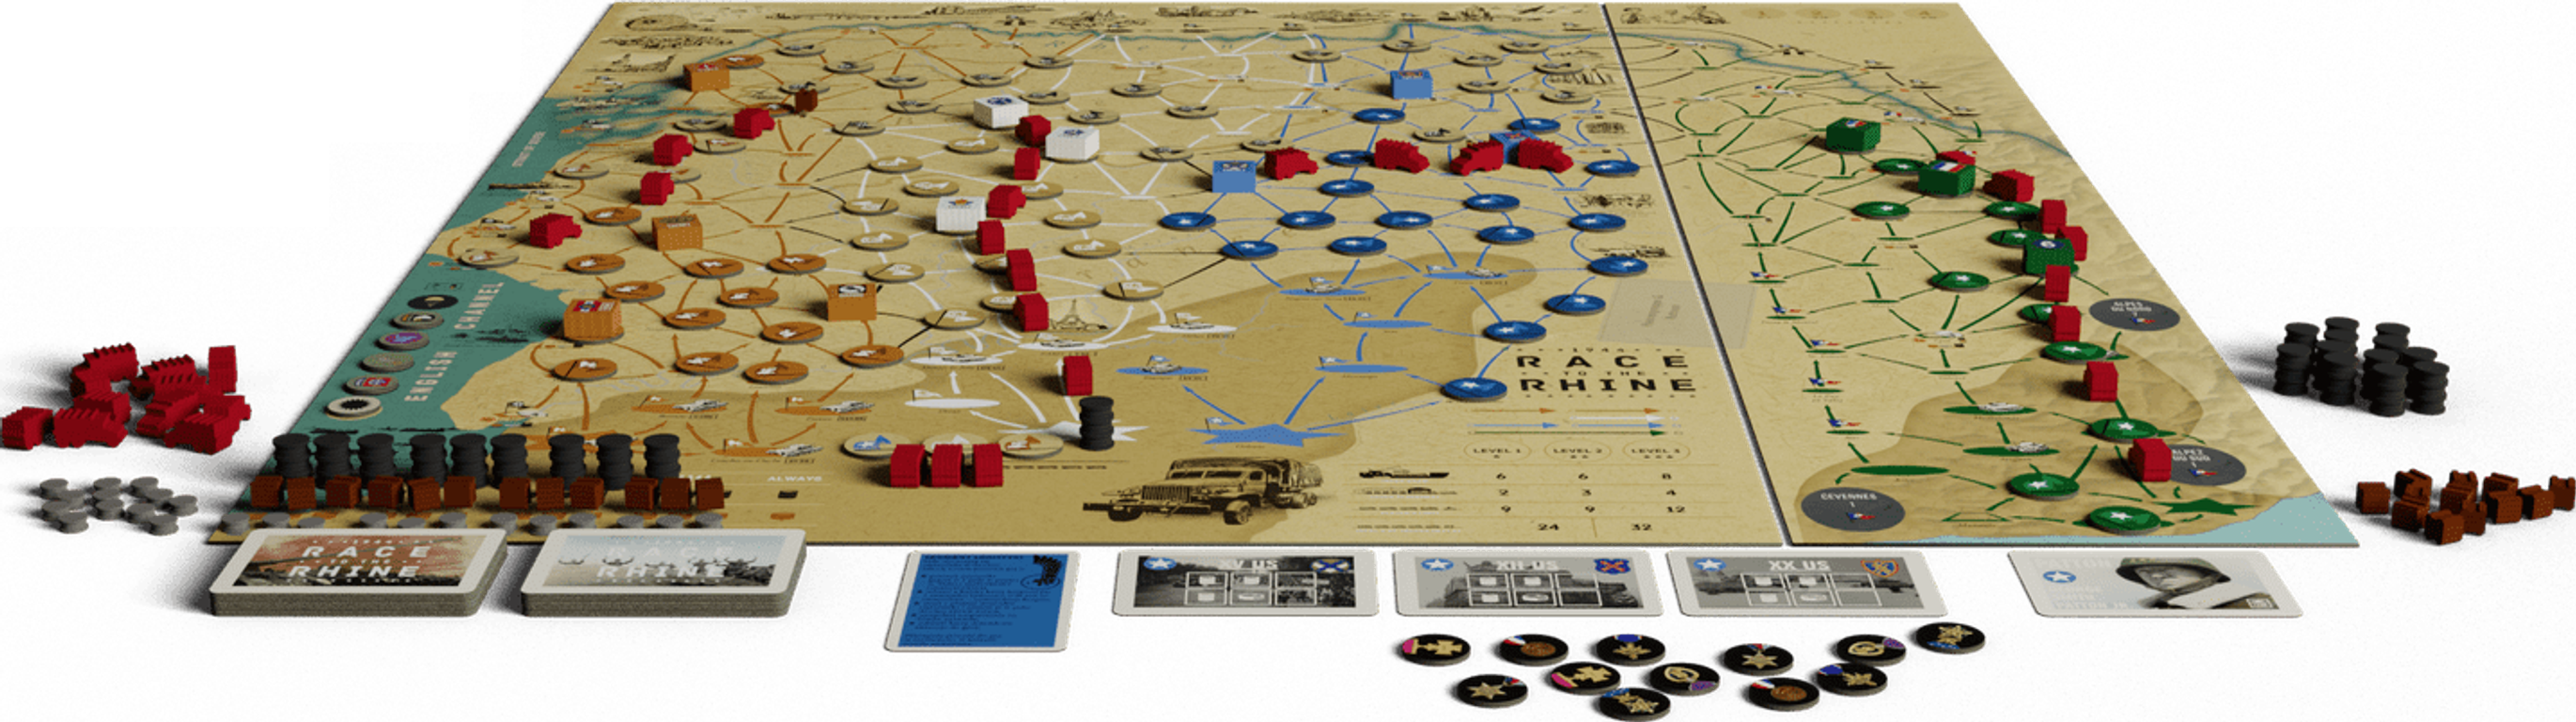 Race to the Rhine: Keep'em Rolling partes